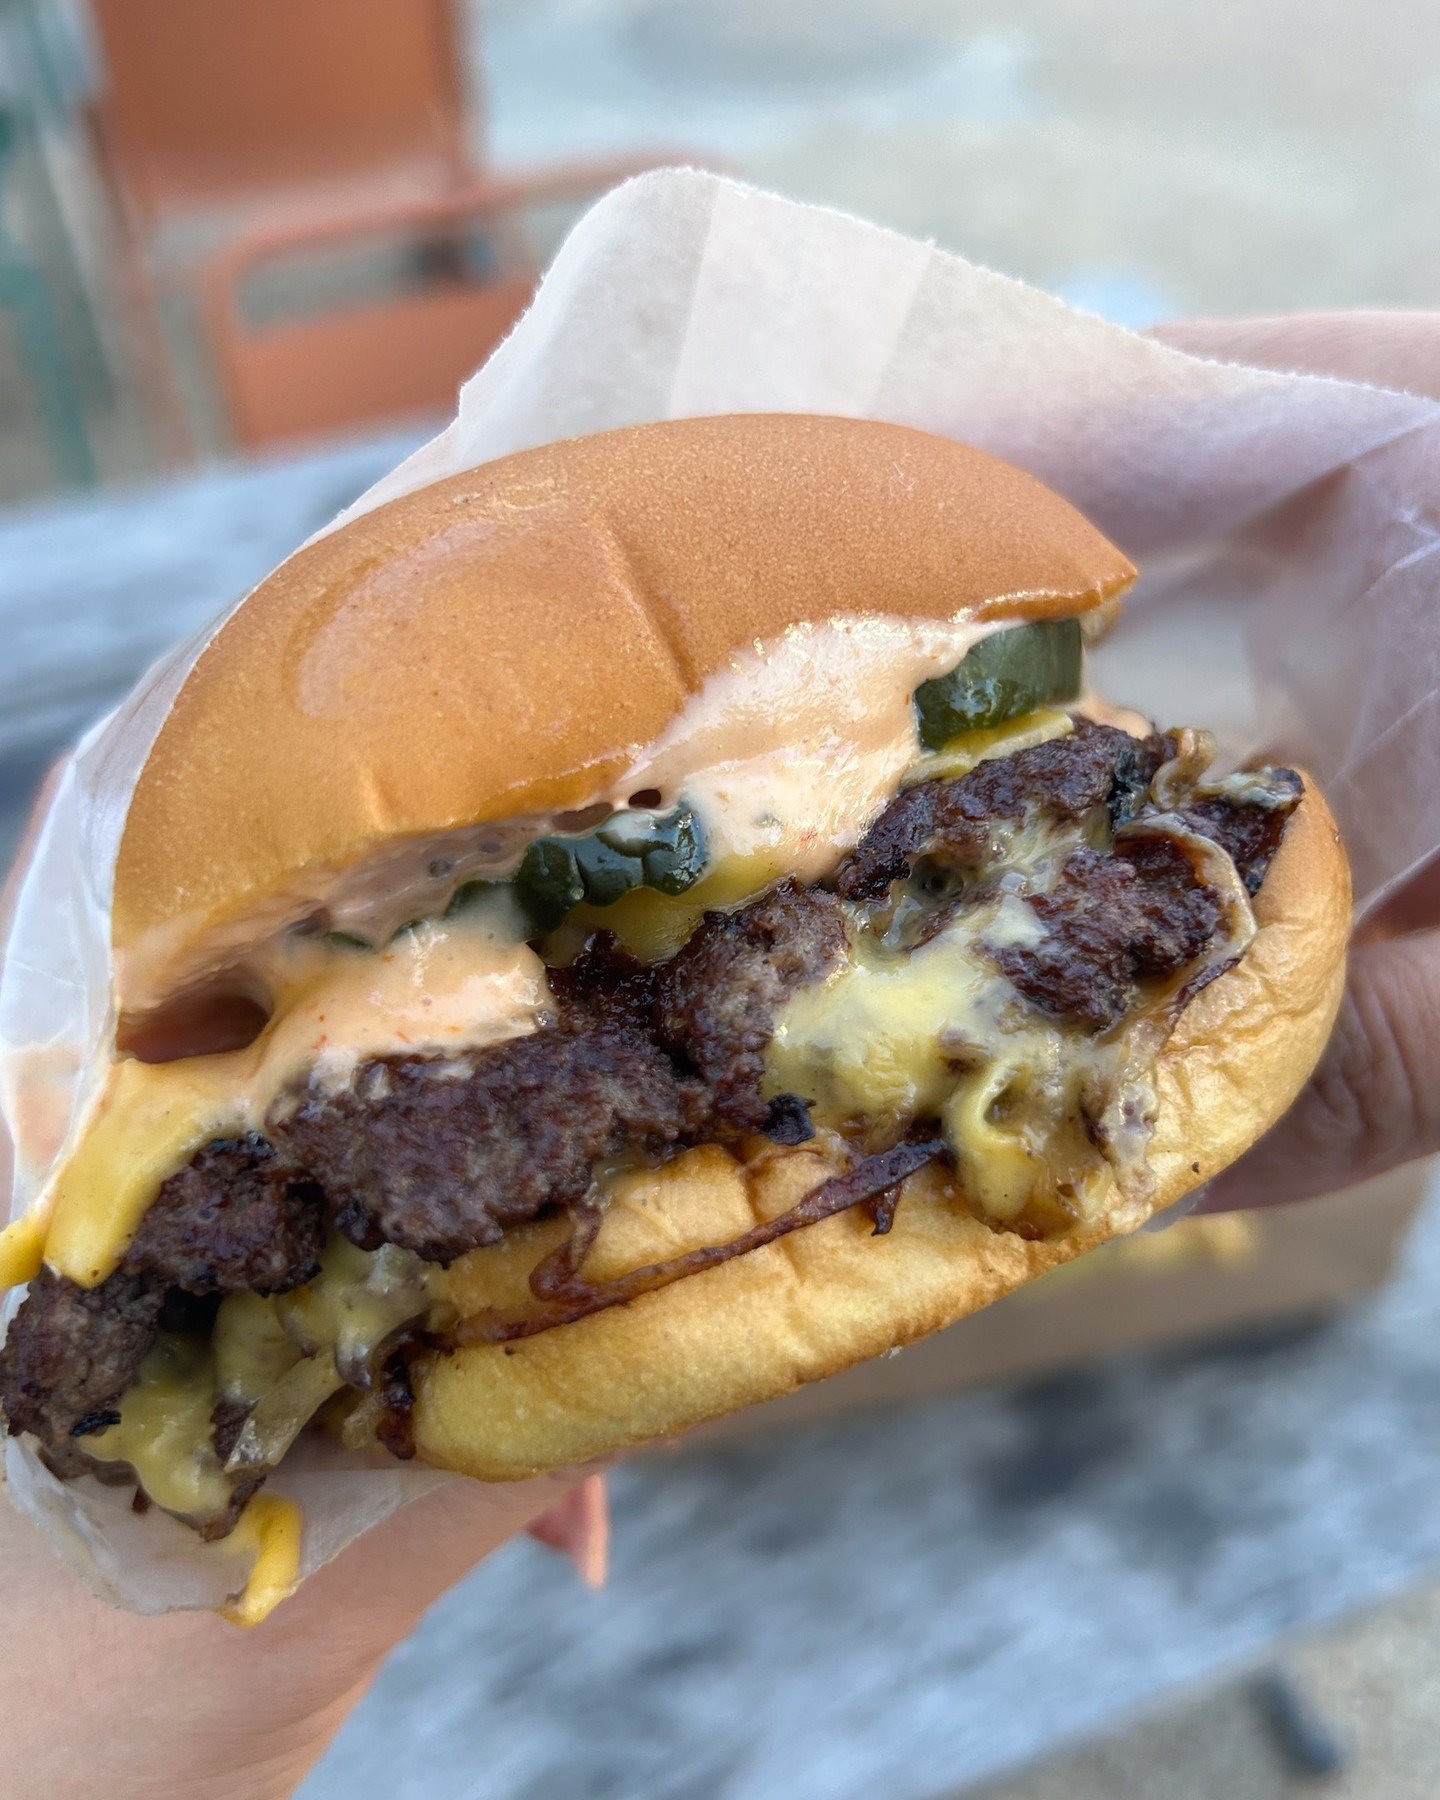 ZOOMIN IN ~ you seeing this too? 🍔⁠
#TheWinDowLA